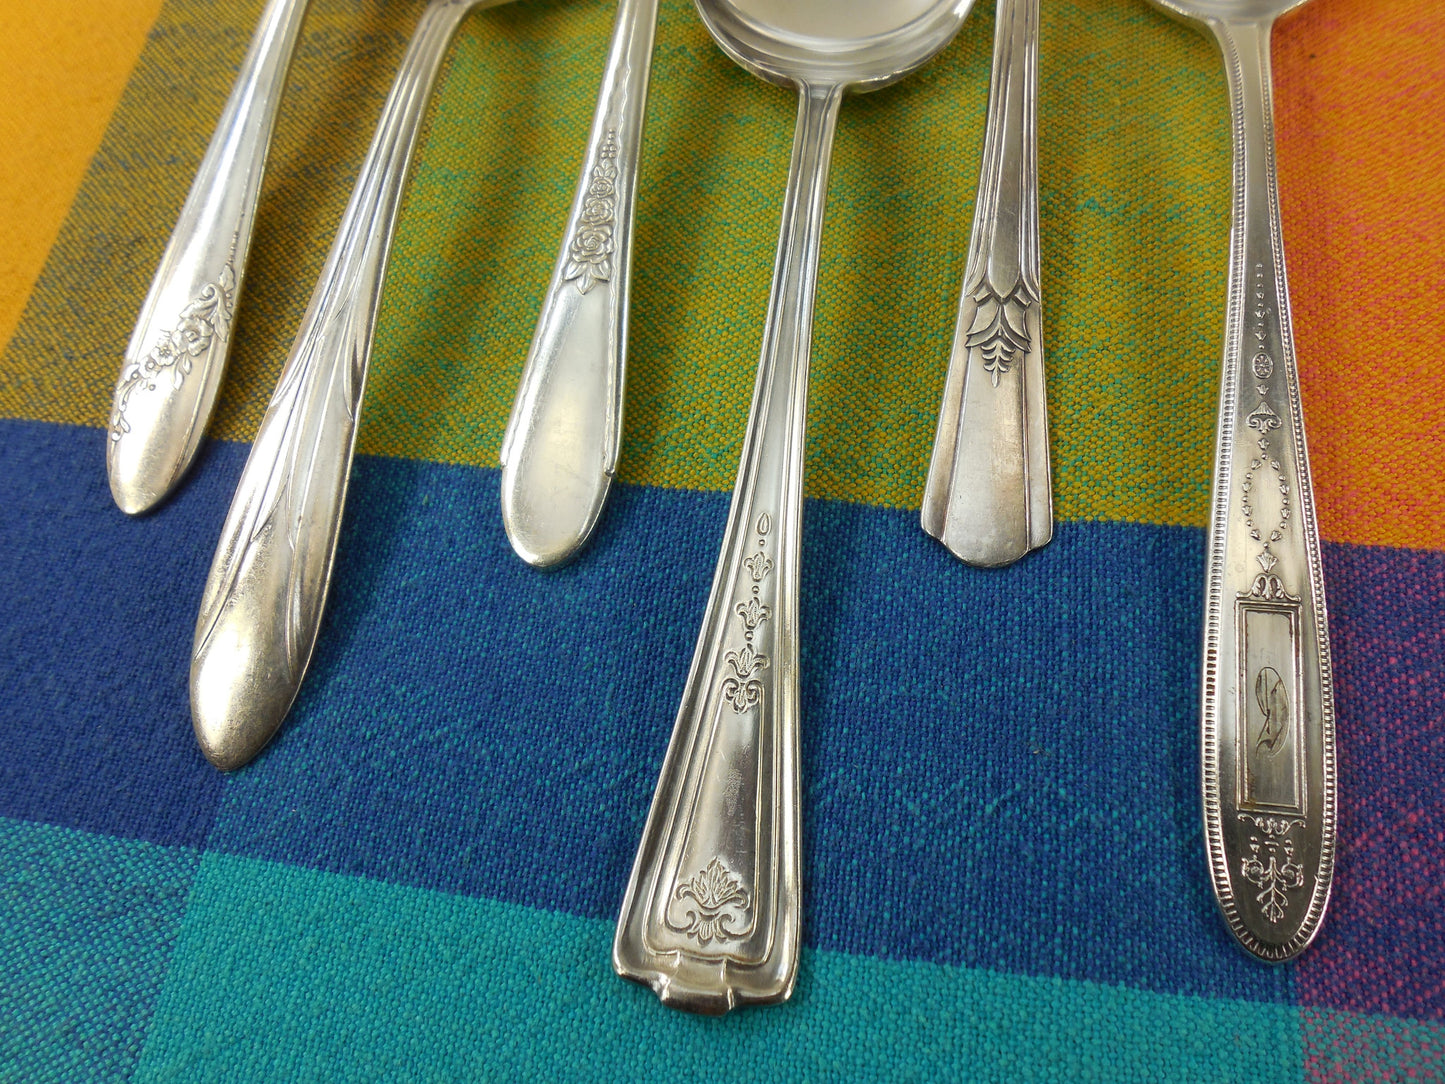 Vintage Mismatched Silverware - 6 Set Silverplate Gumbo Soup Spoons - Handle View